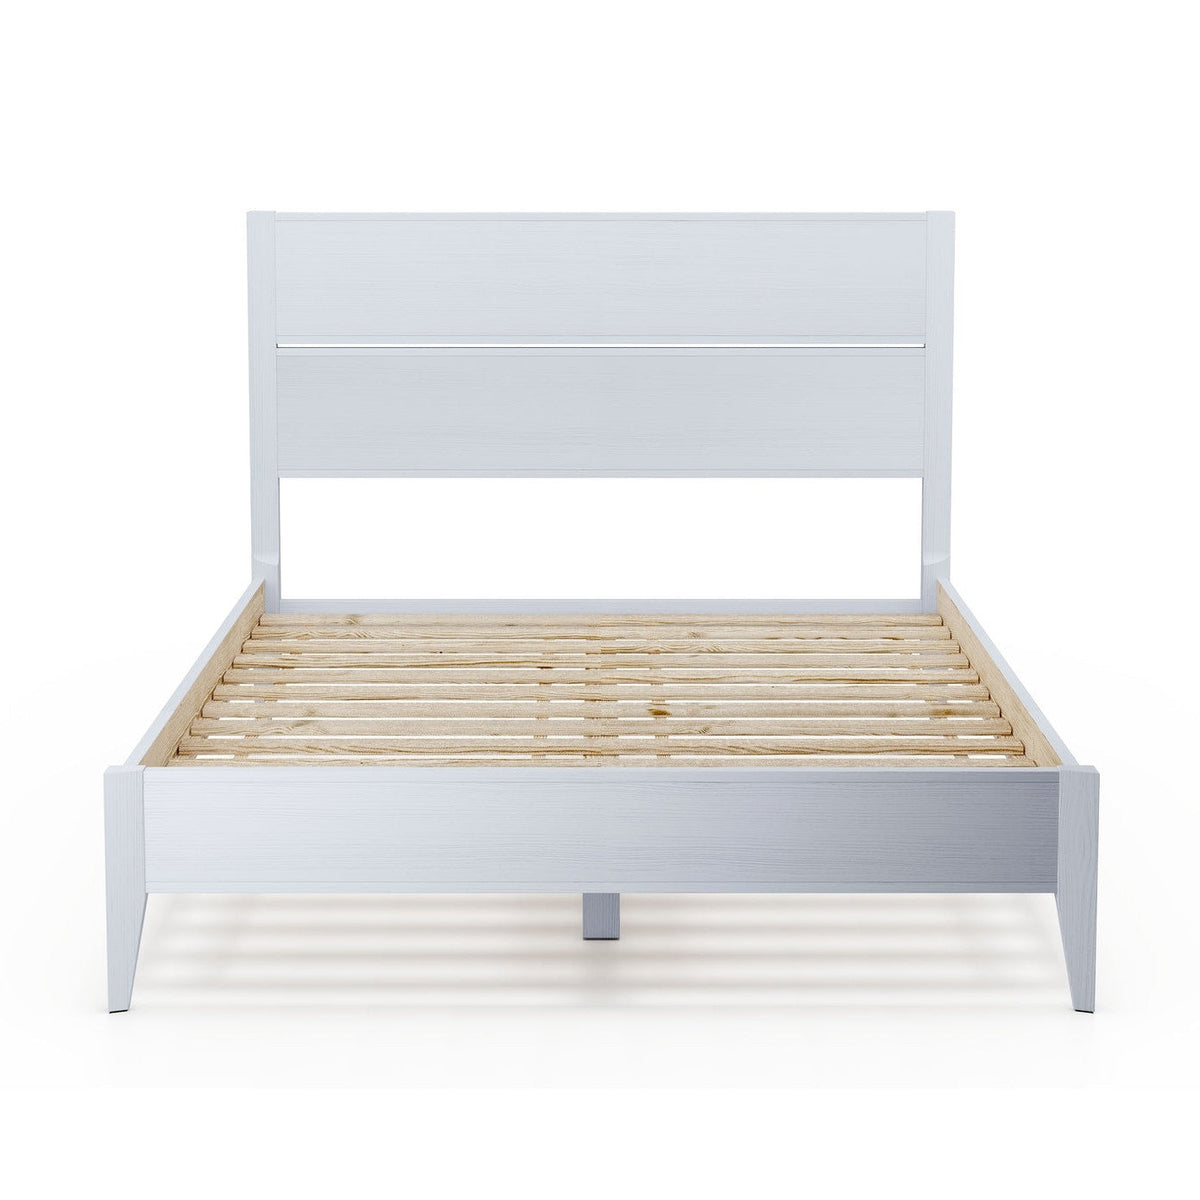 Queen Size Rustic White Mid Century Slatted Platform Bed